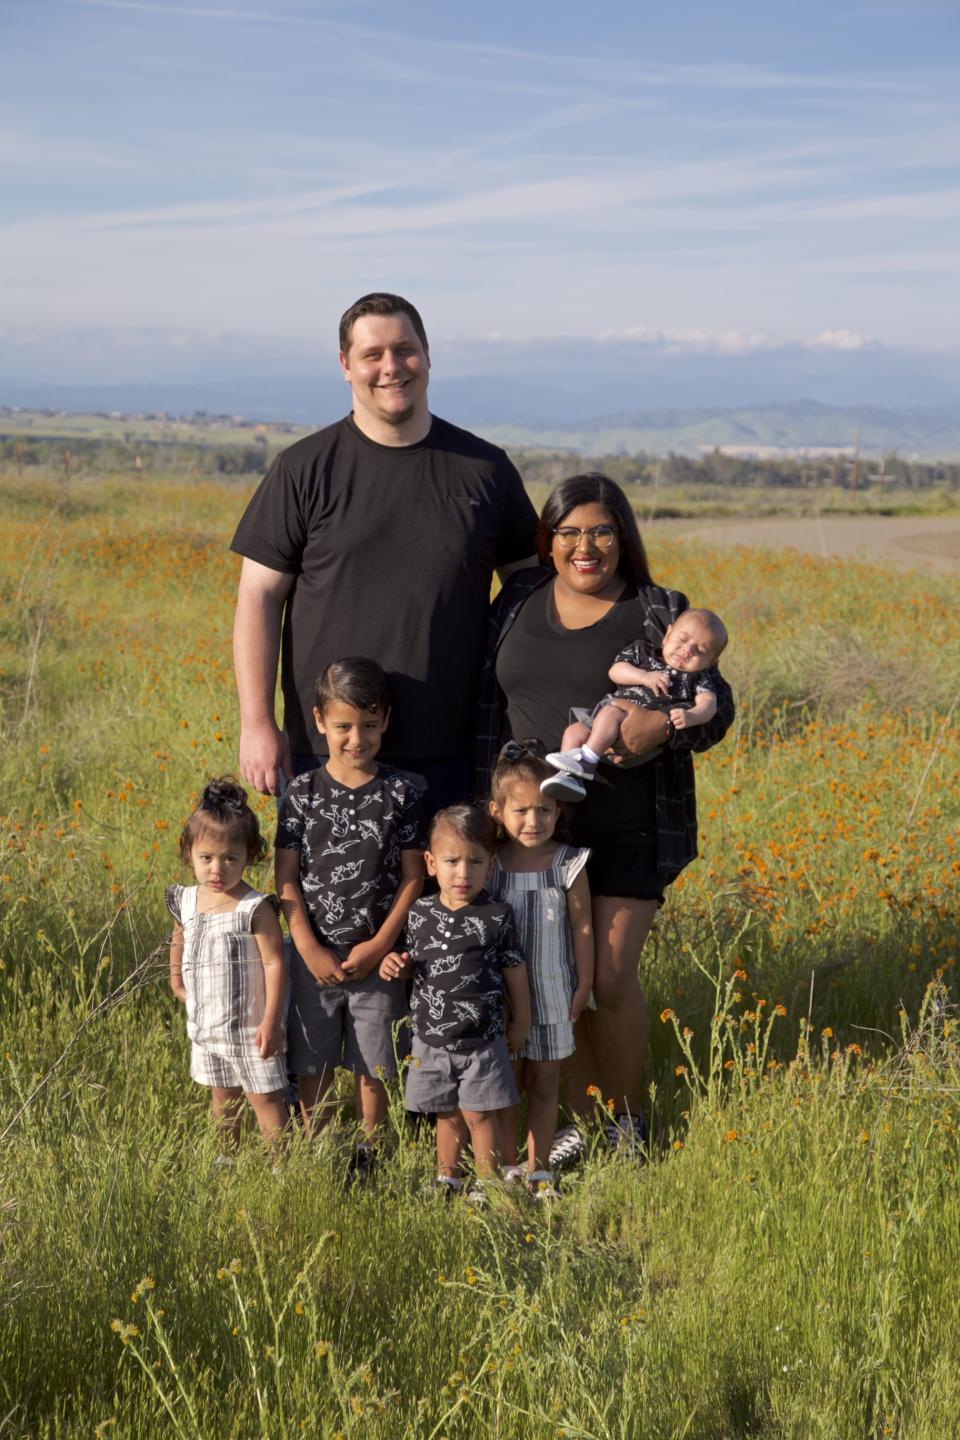 Cody and Chanel Walton of Fresno, California, and their five children. The family of seven is income-less since Cody was laid off from his job at a hotel. (Photo from Chanel Walton)